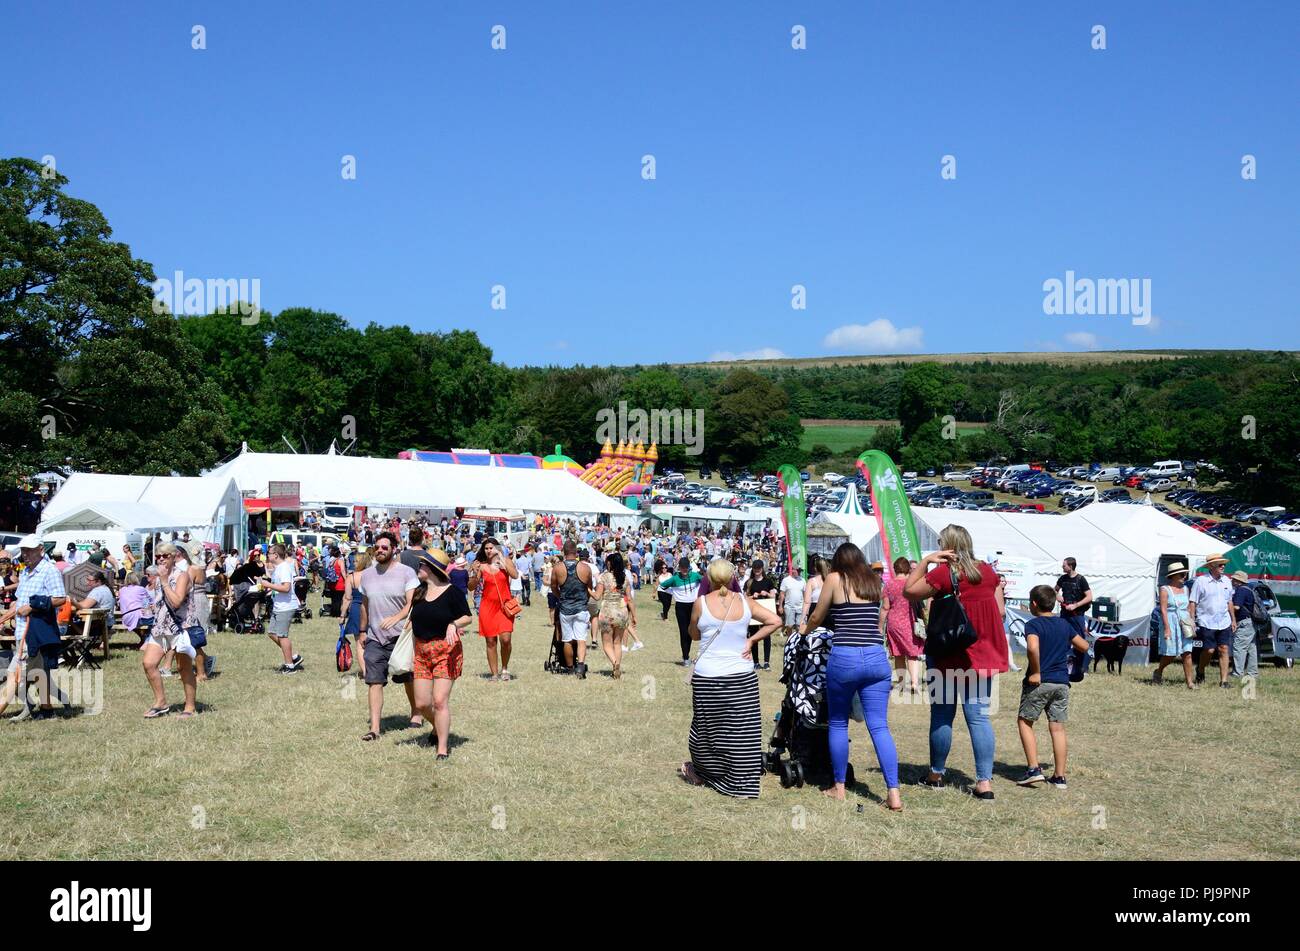 Crowds of people walking in an agricultural show Vale of Glamorgan Wales Cymru UK Stock Photo